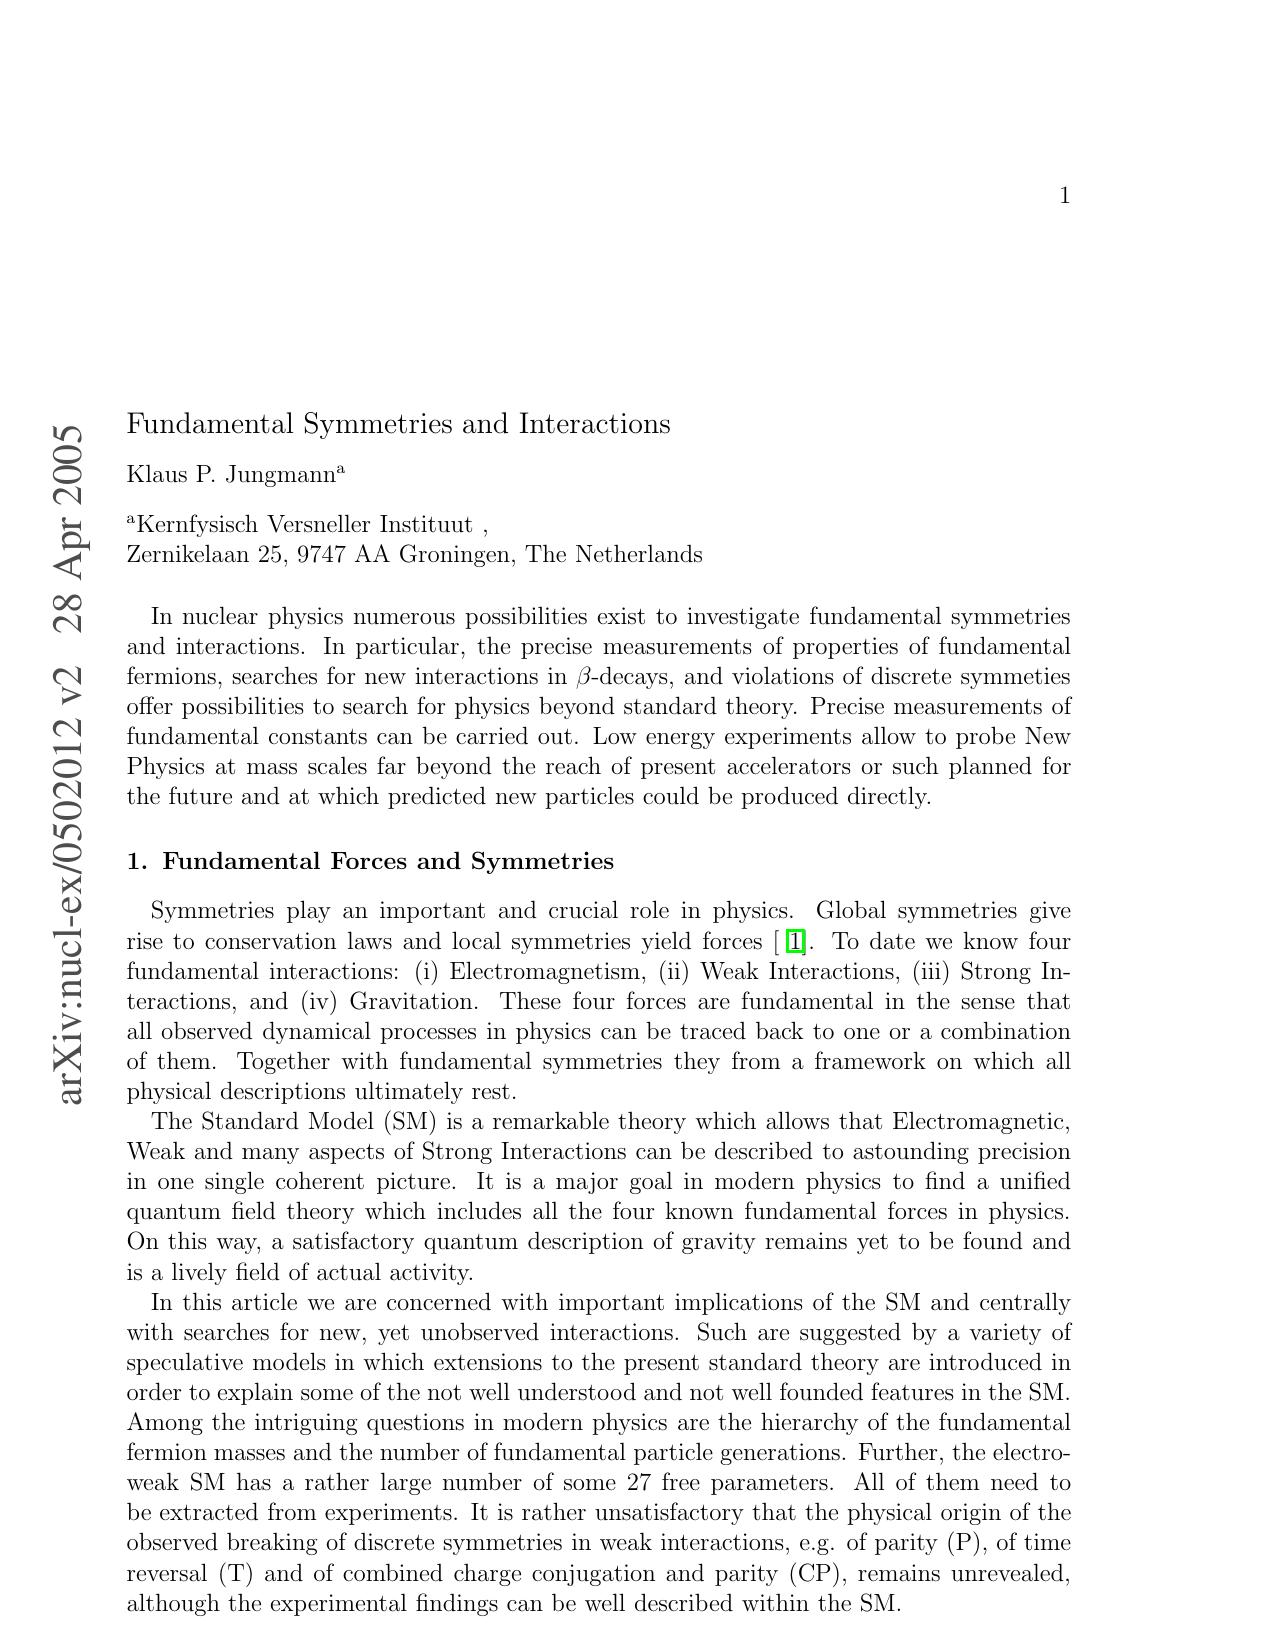 Fundamental Symmetries and Interactions - Journal Article